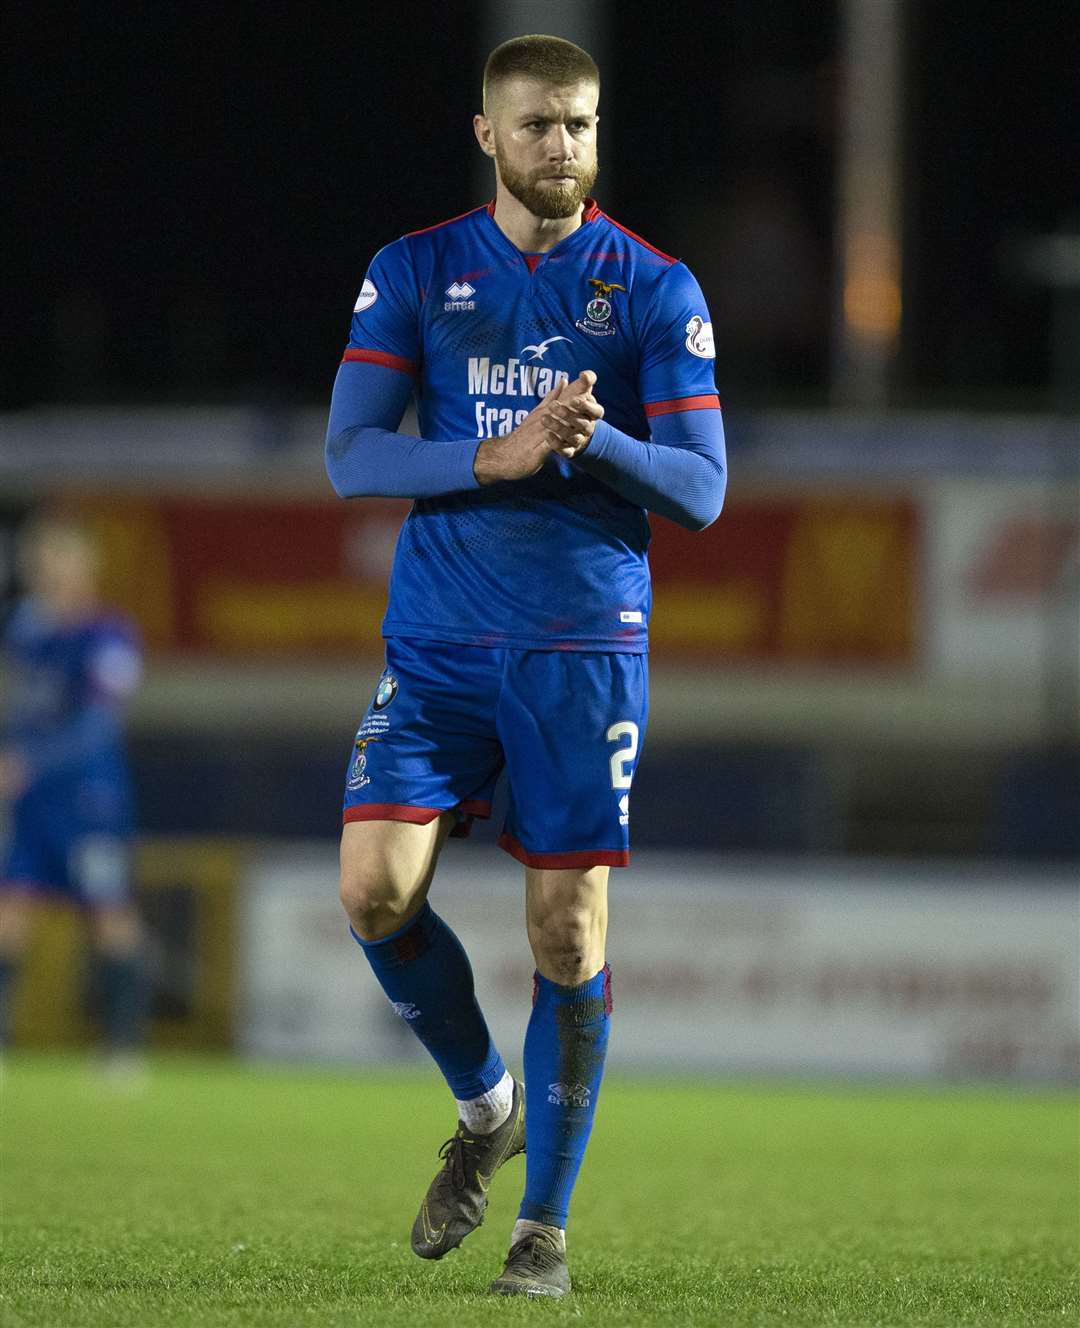 Shaun Rooney arrived at Inverness in 2018.